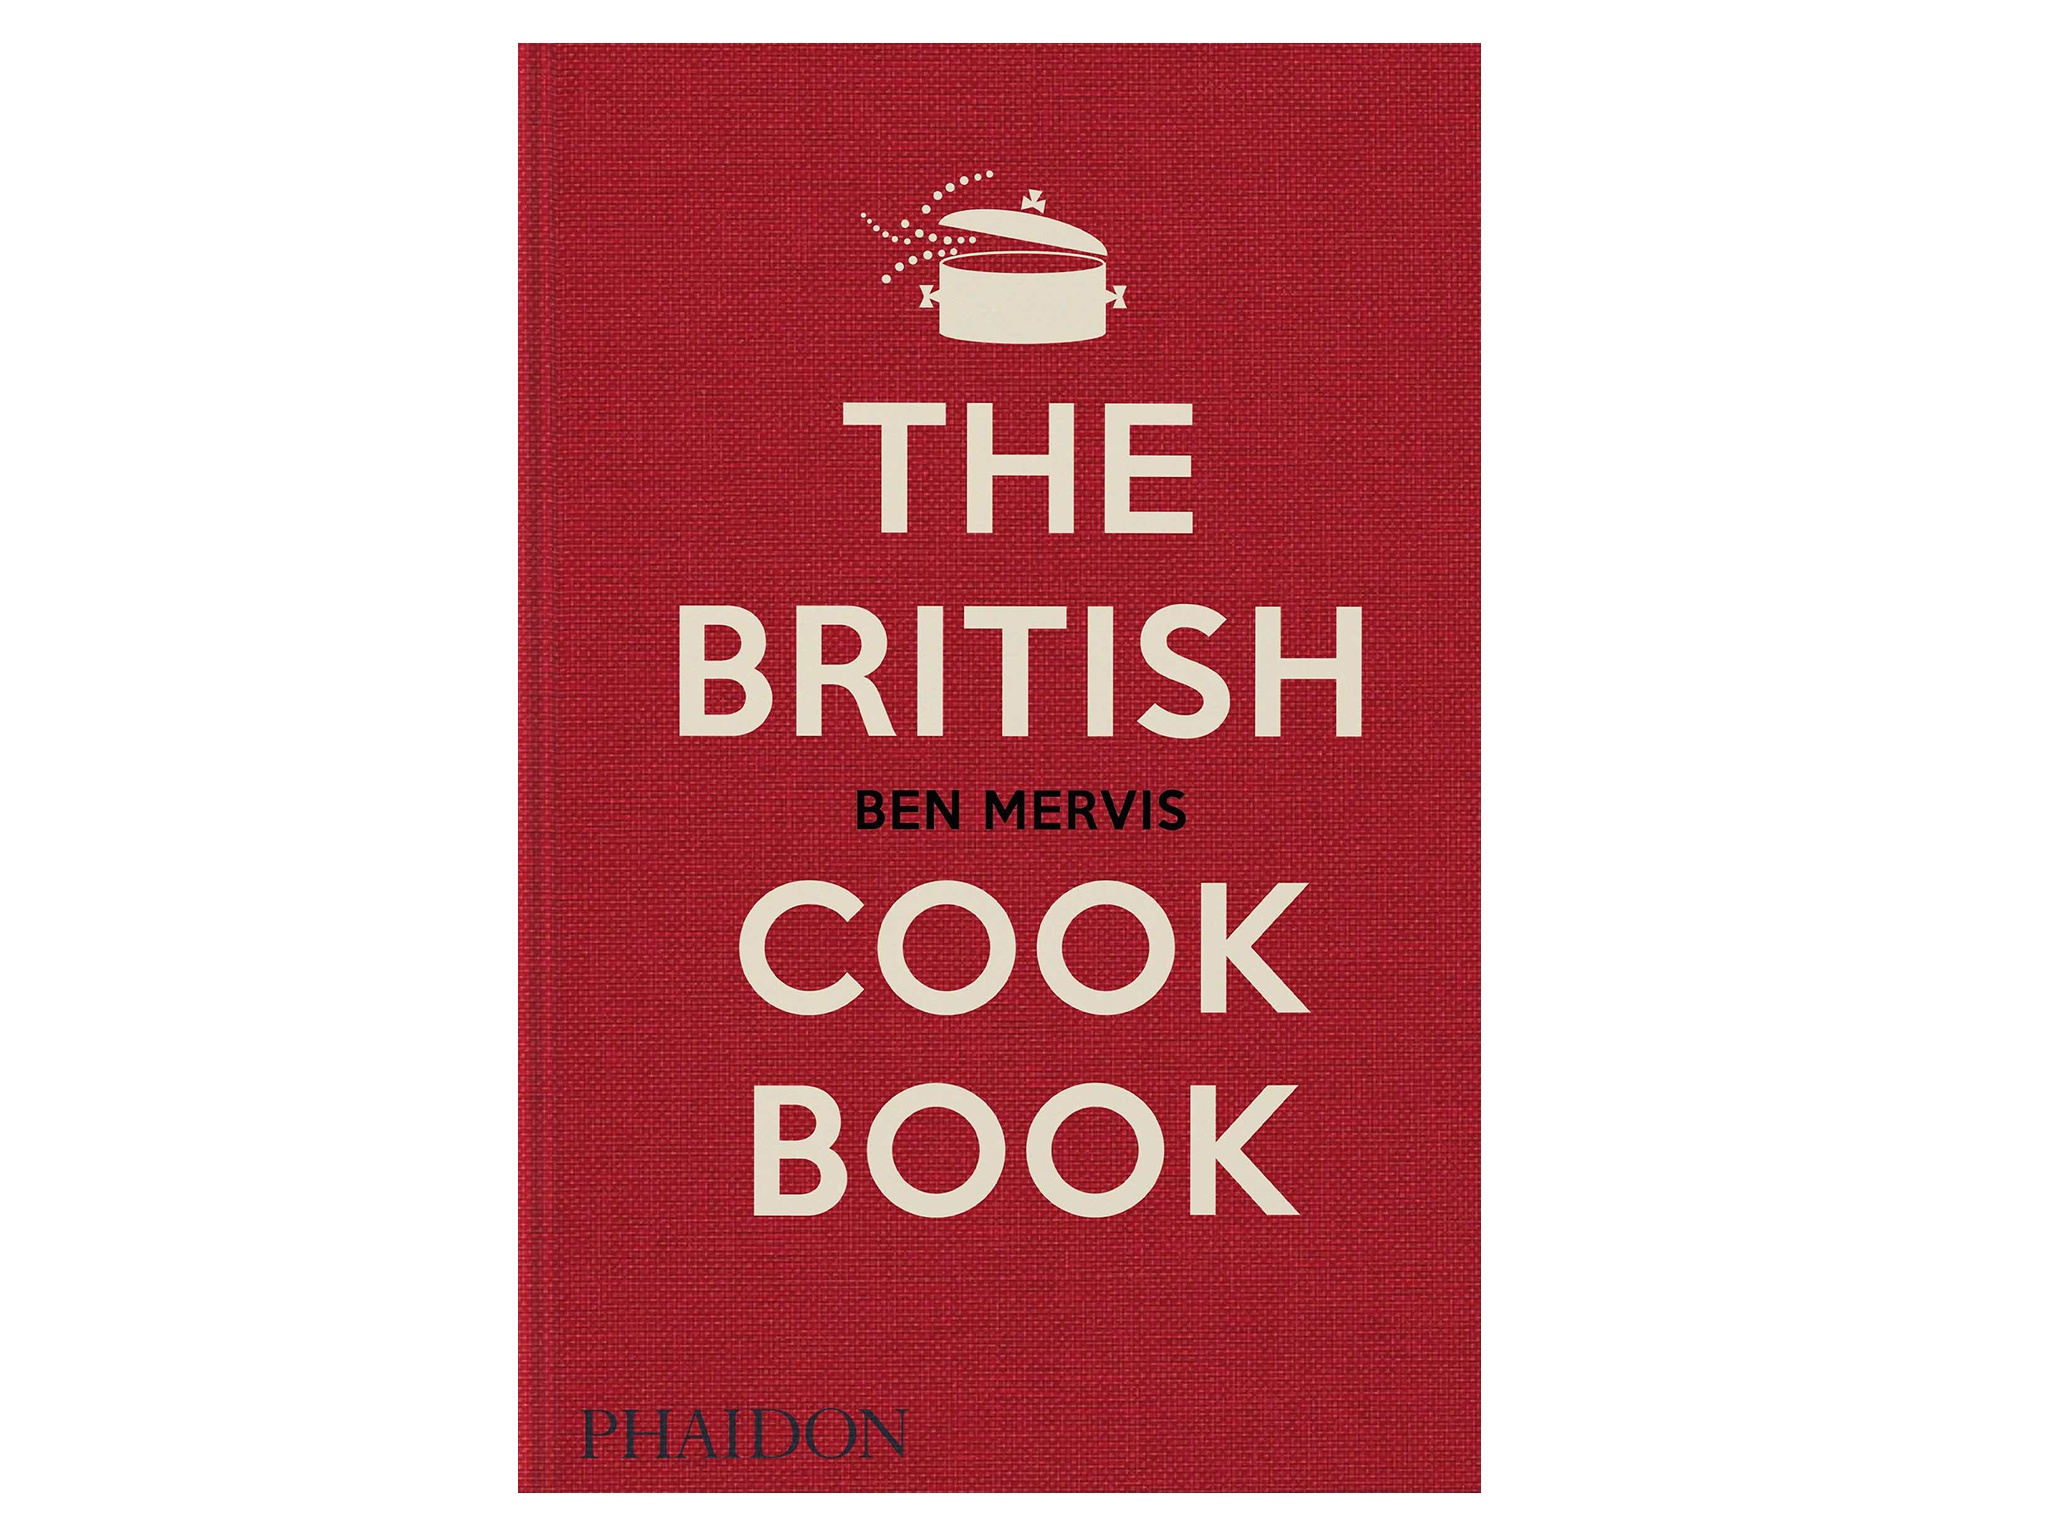 ‘The British Cookbook’ by Ben Mervis, published by Phaidon.png